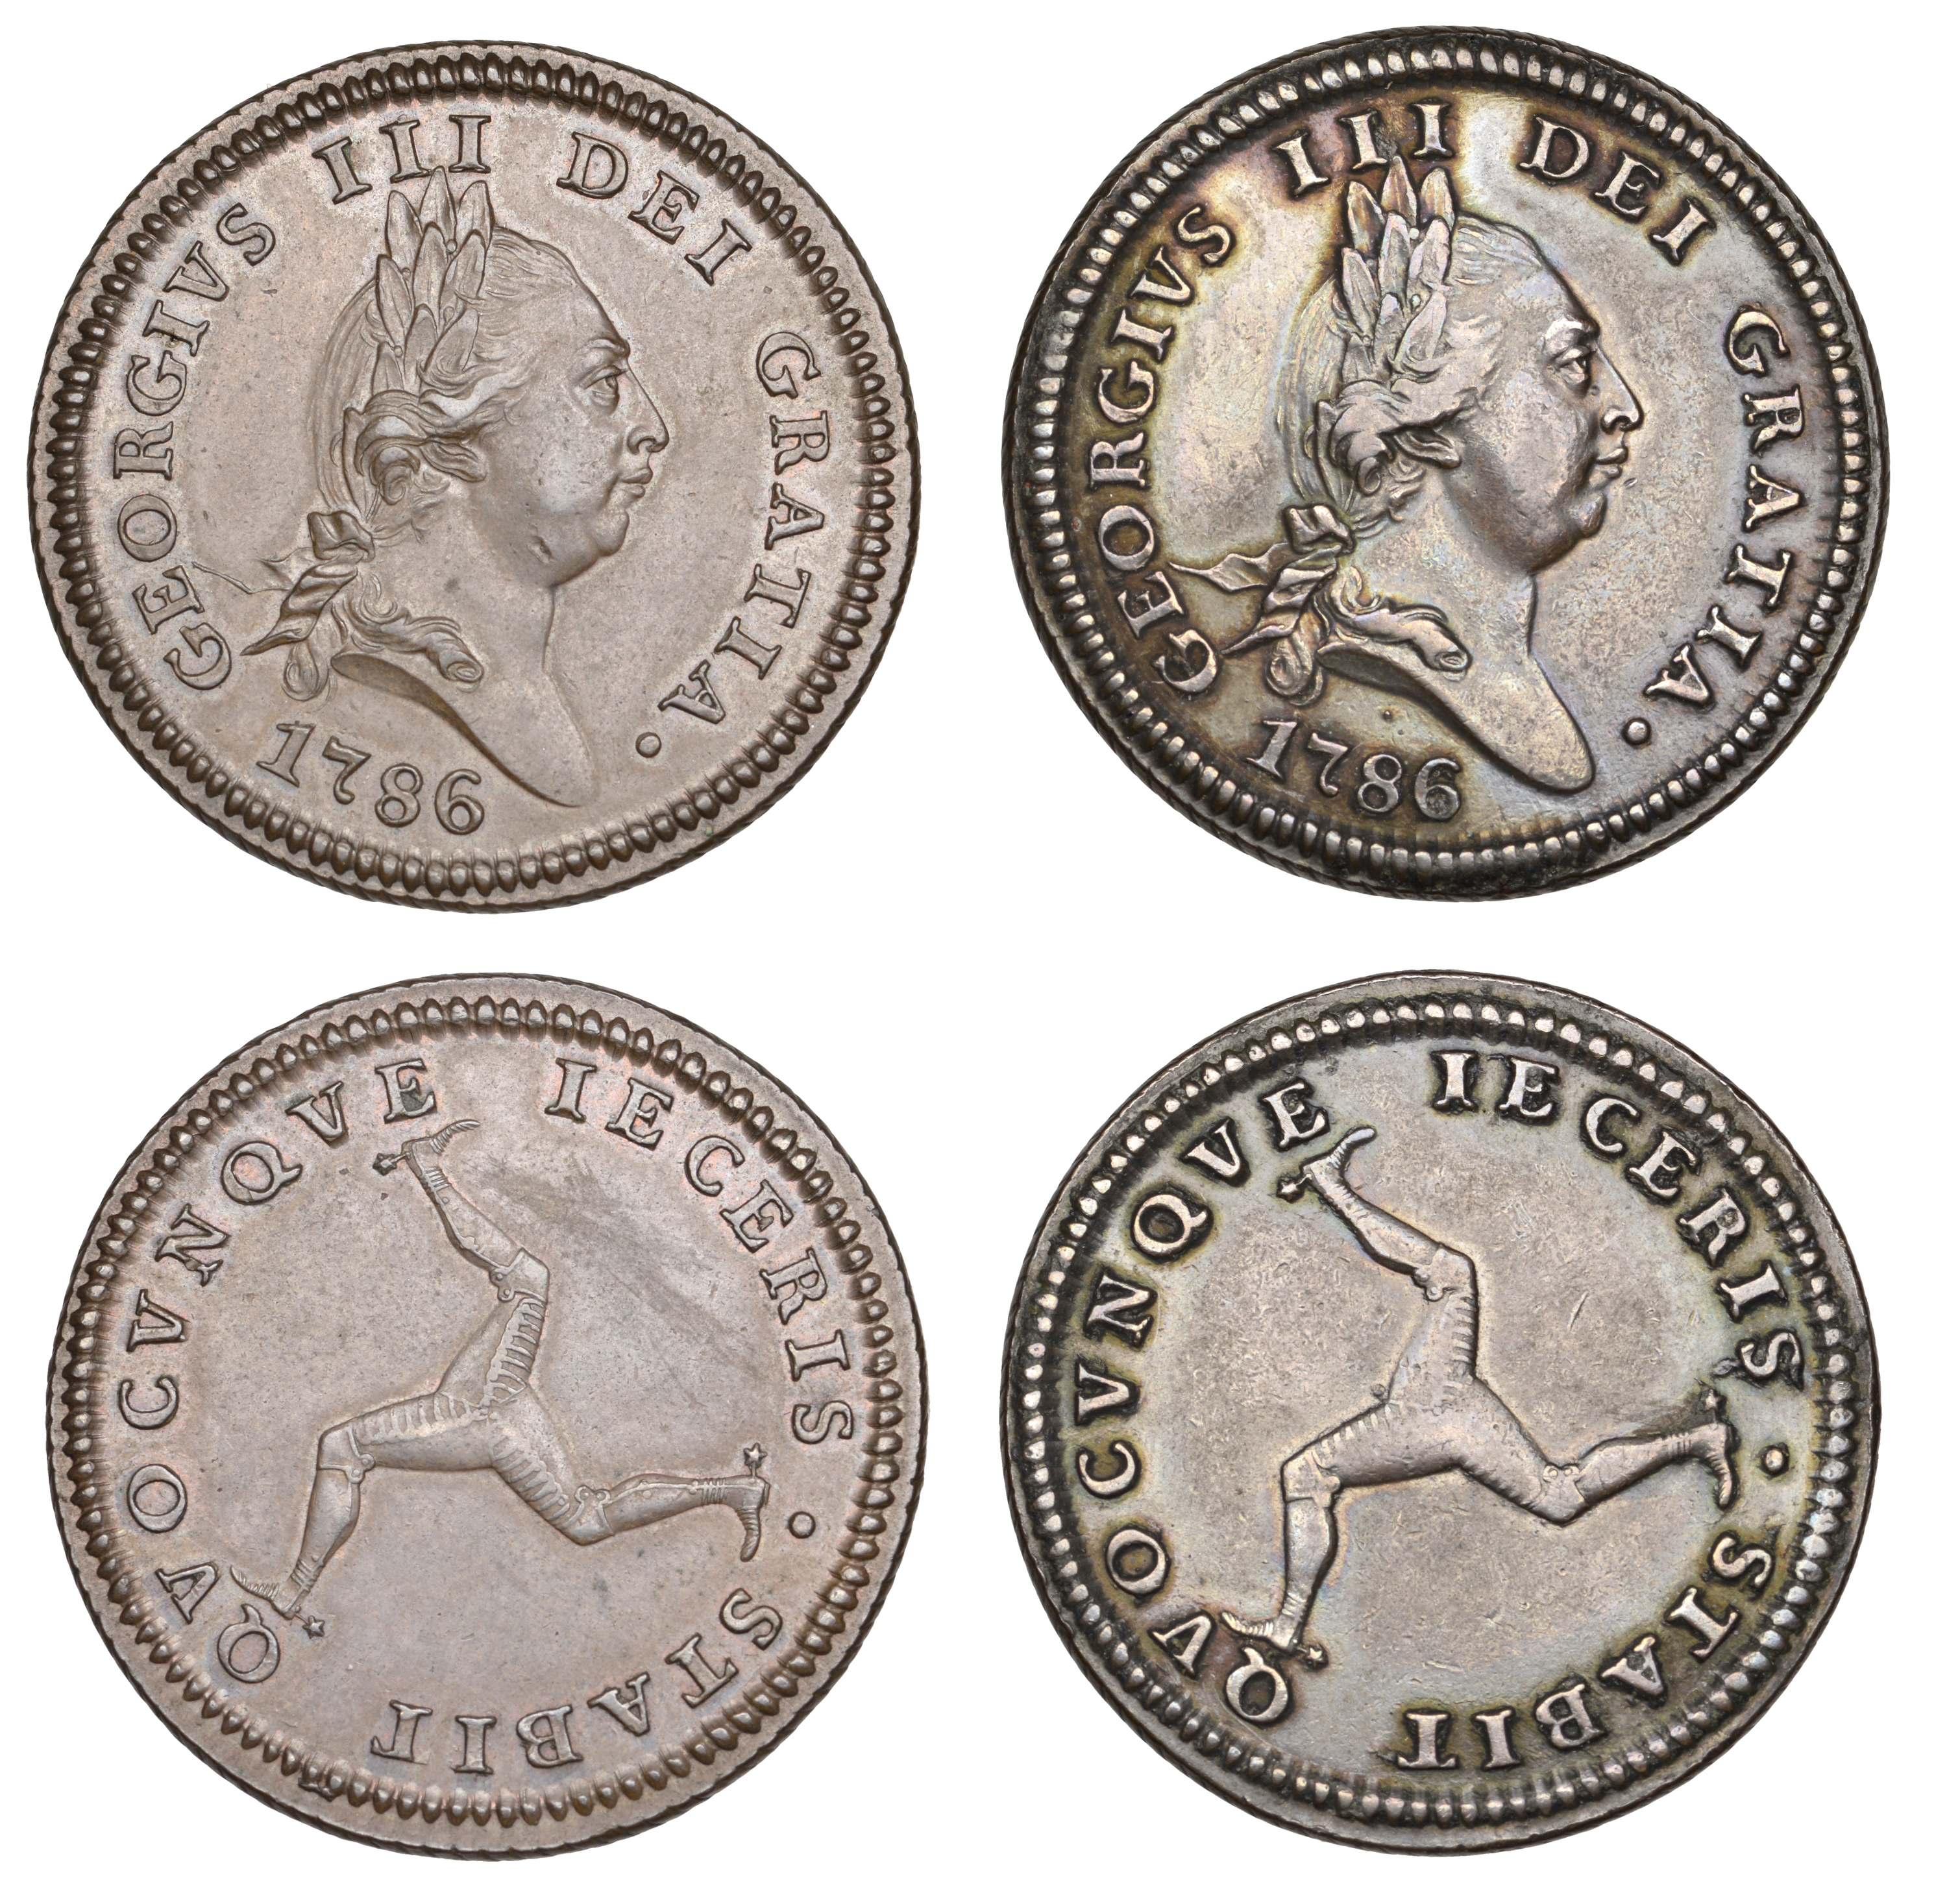 Isle of Man, George III, Pennies (2), both 1786, with and without pellet below bust (S 7413)...